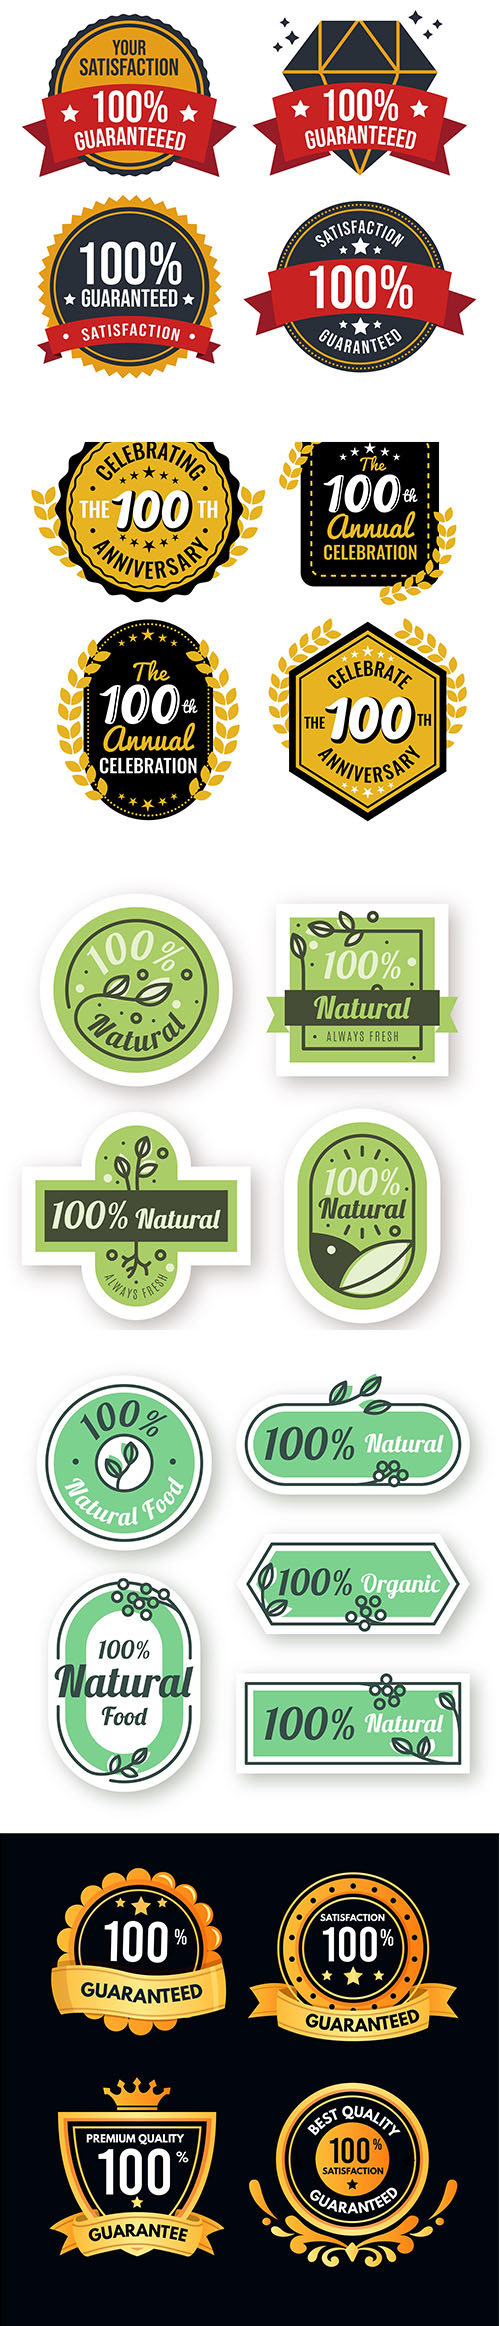 All natural badge collection